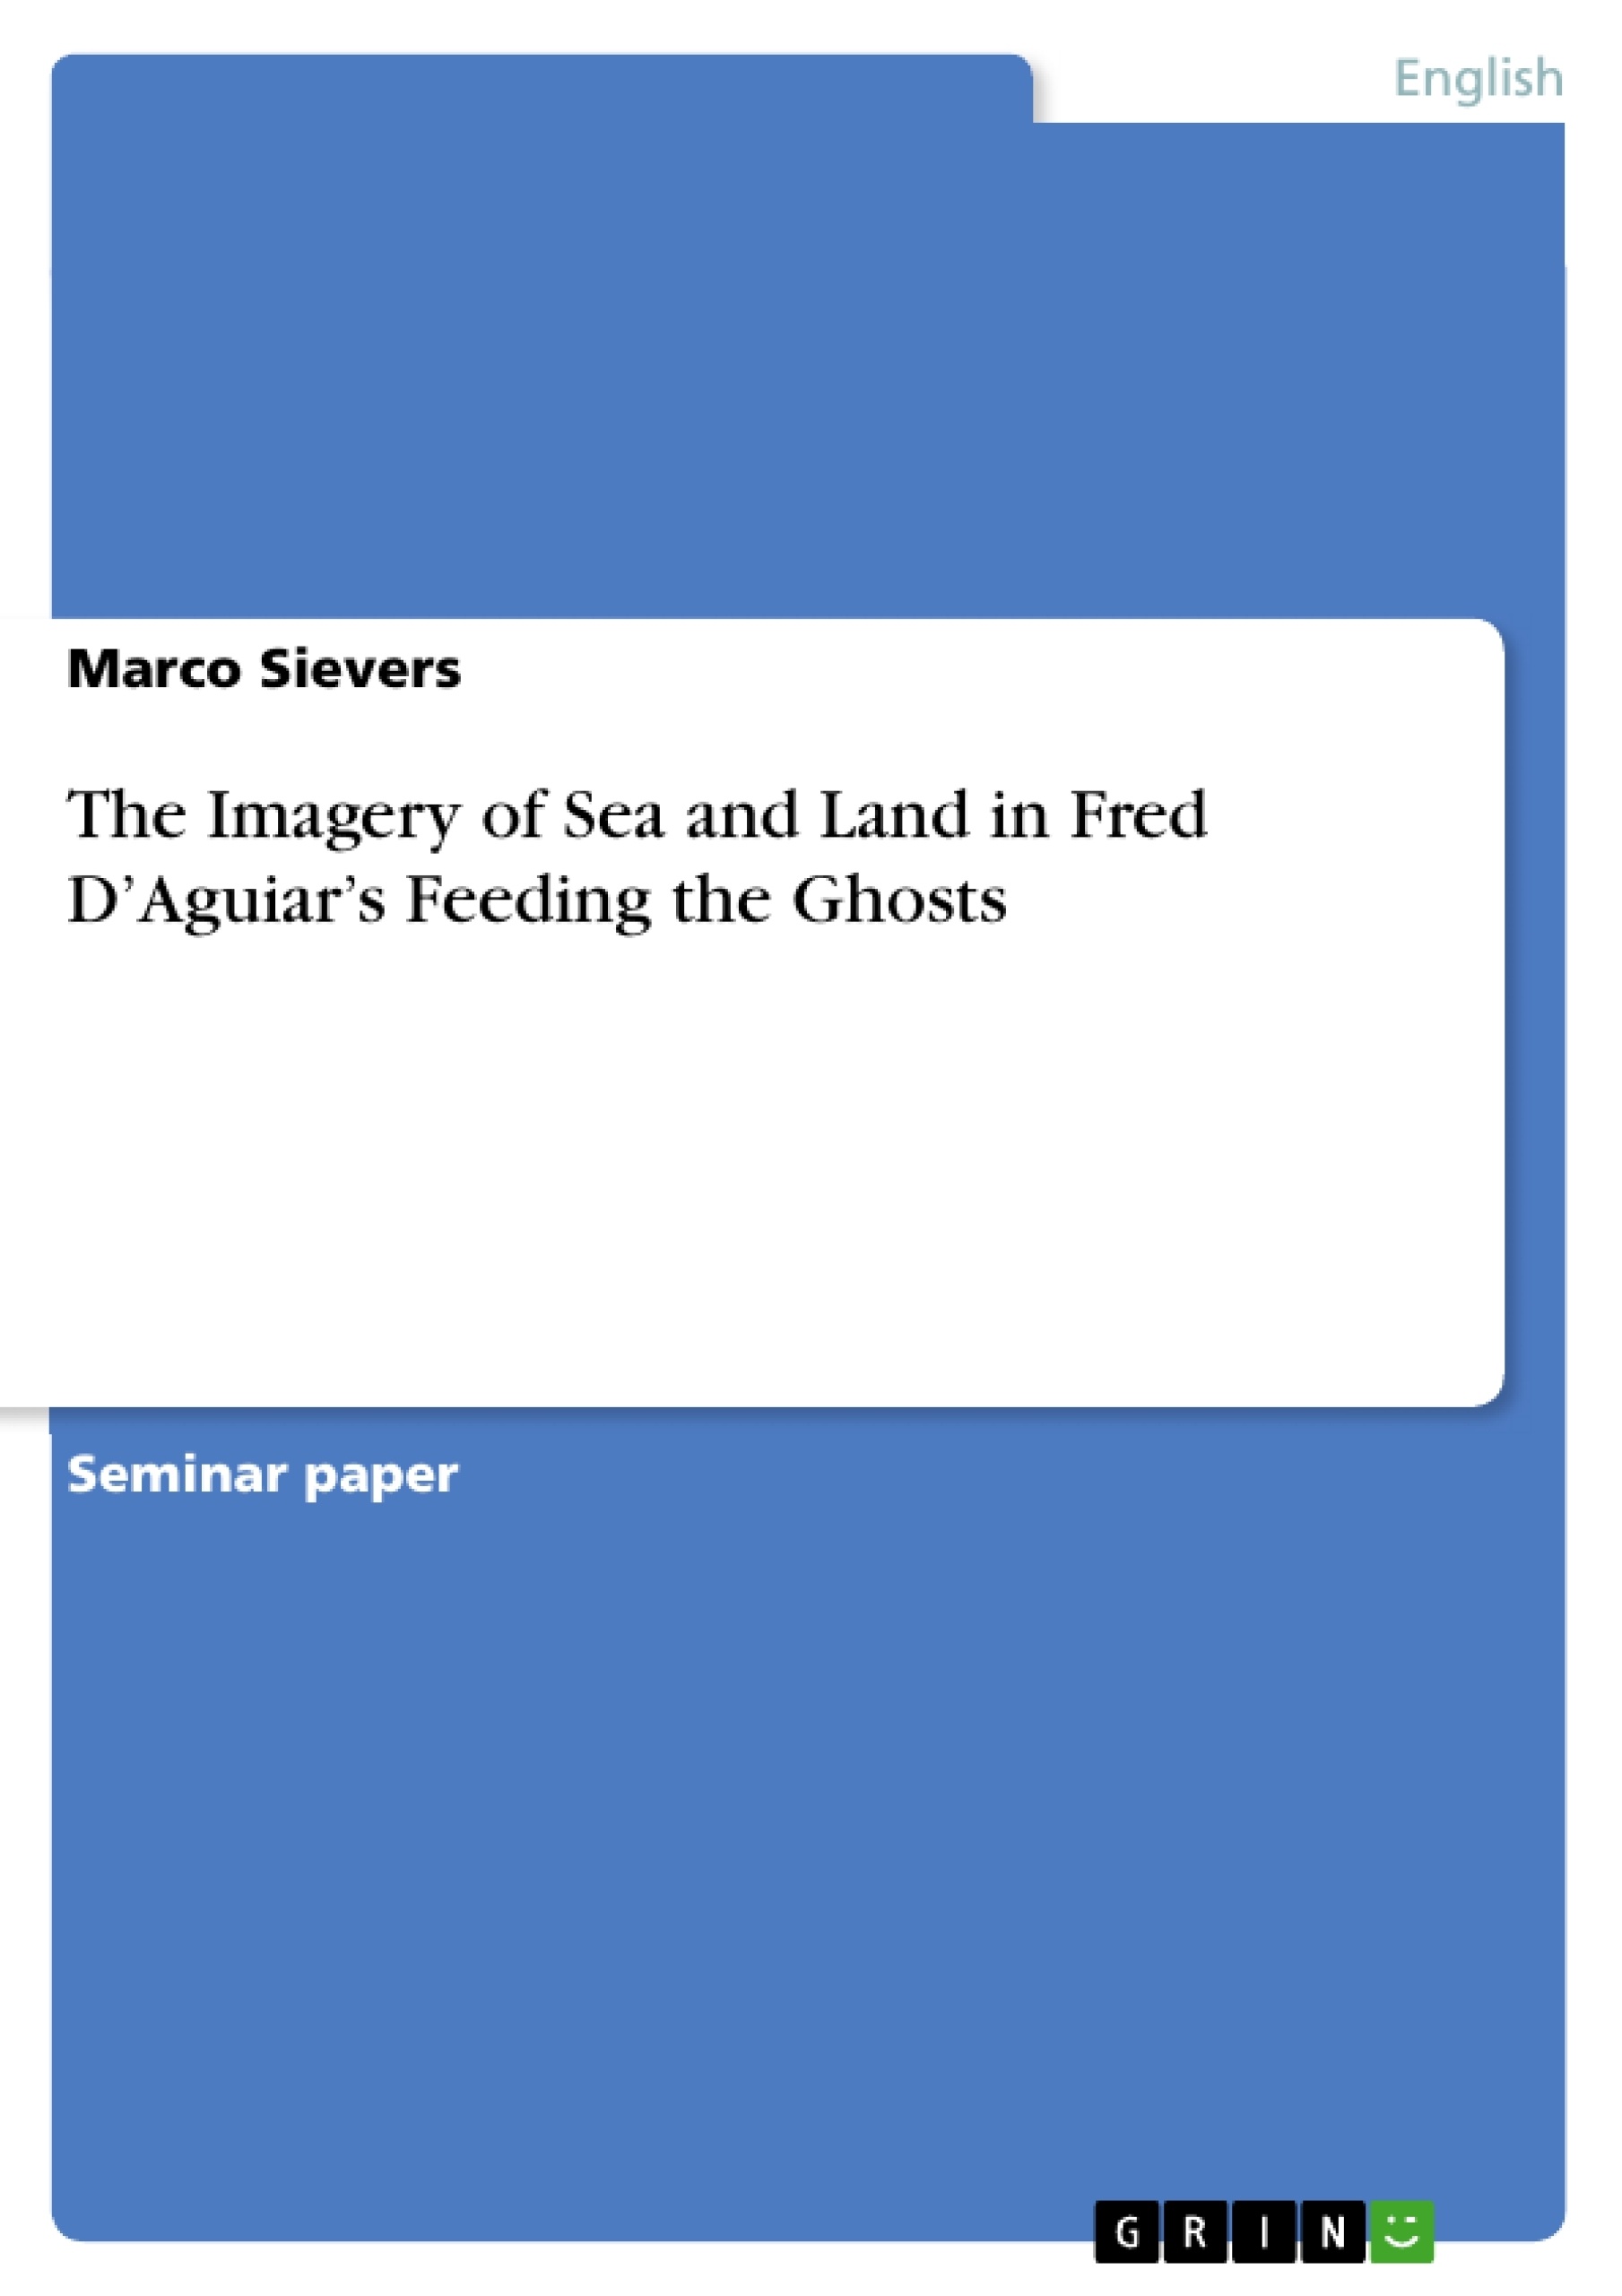 Titre: The Imagery of Sea and Land in Fred D’Aguiar’s Feeding the Ghosts 